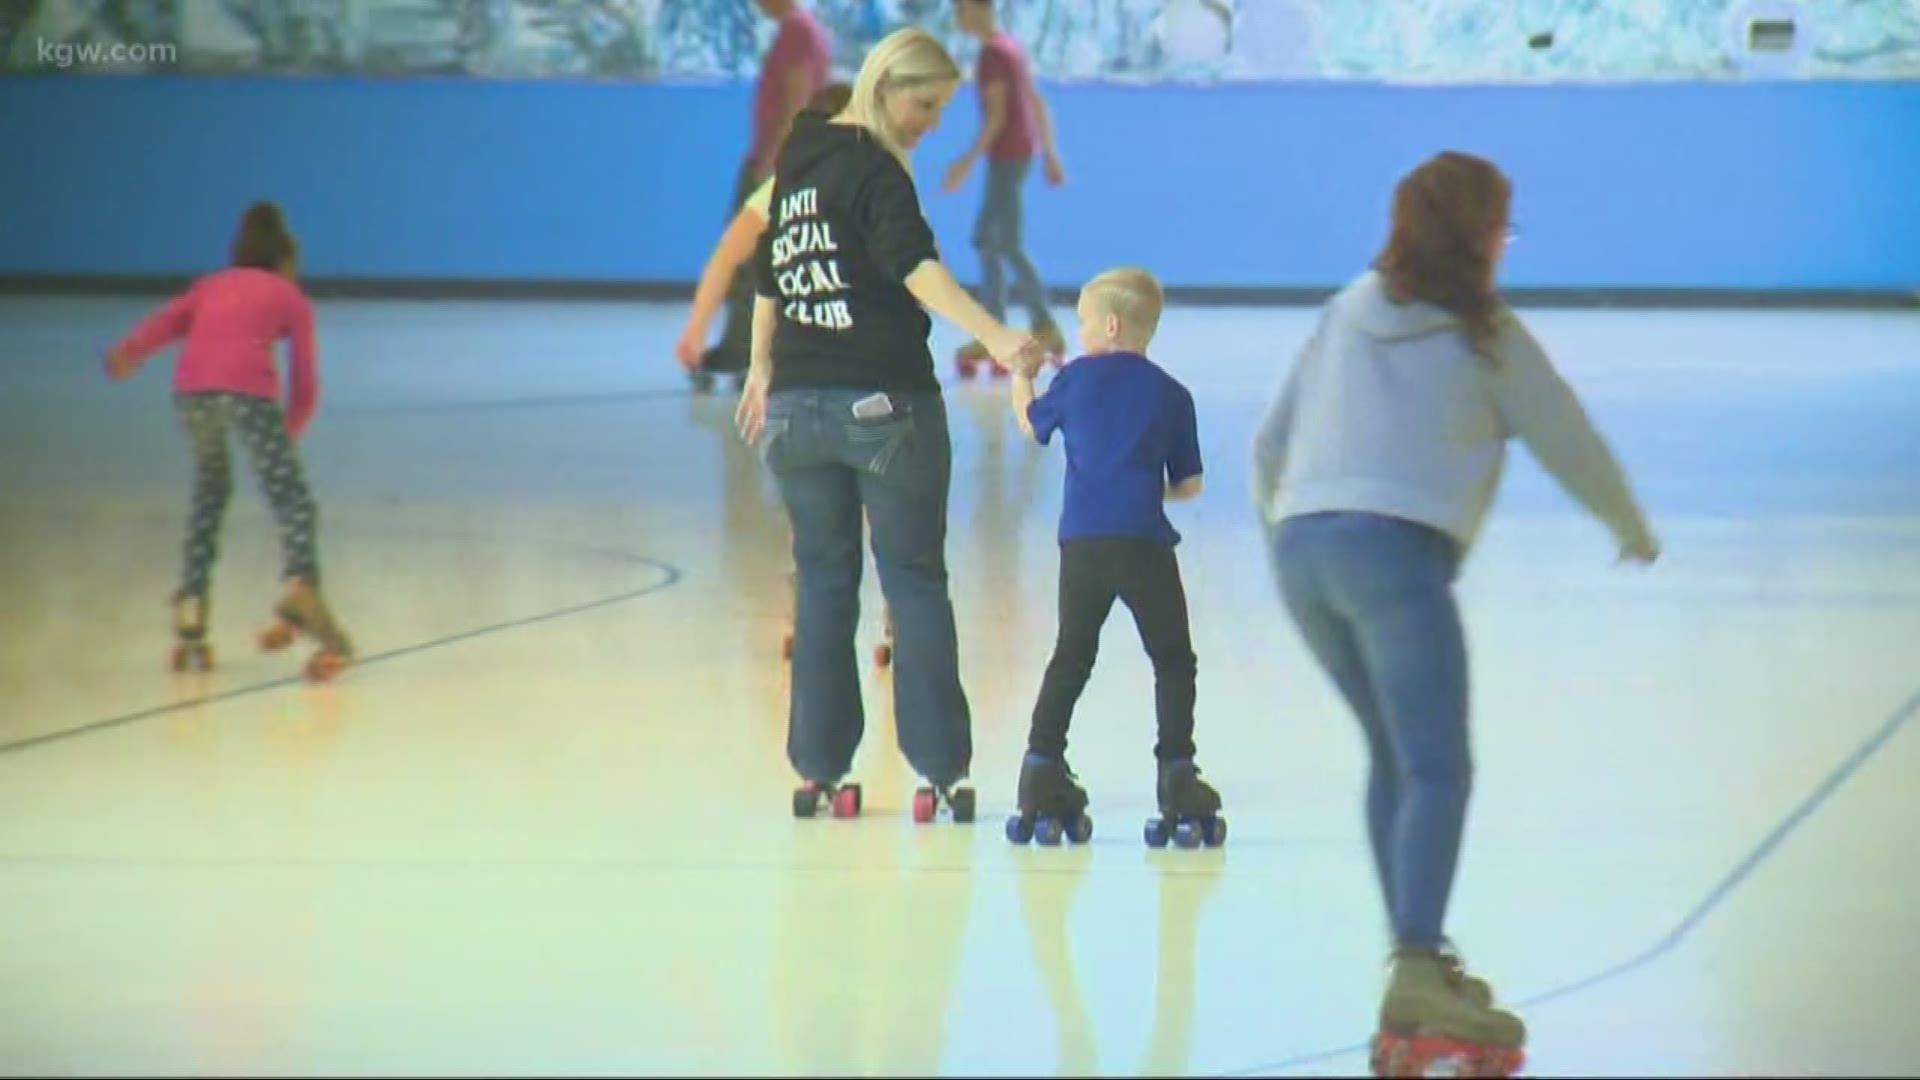 After 44 years in business, Gresham's Skate World closed on Sunday